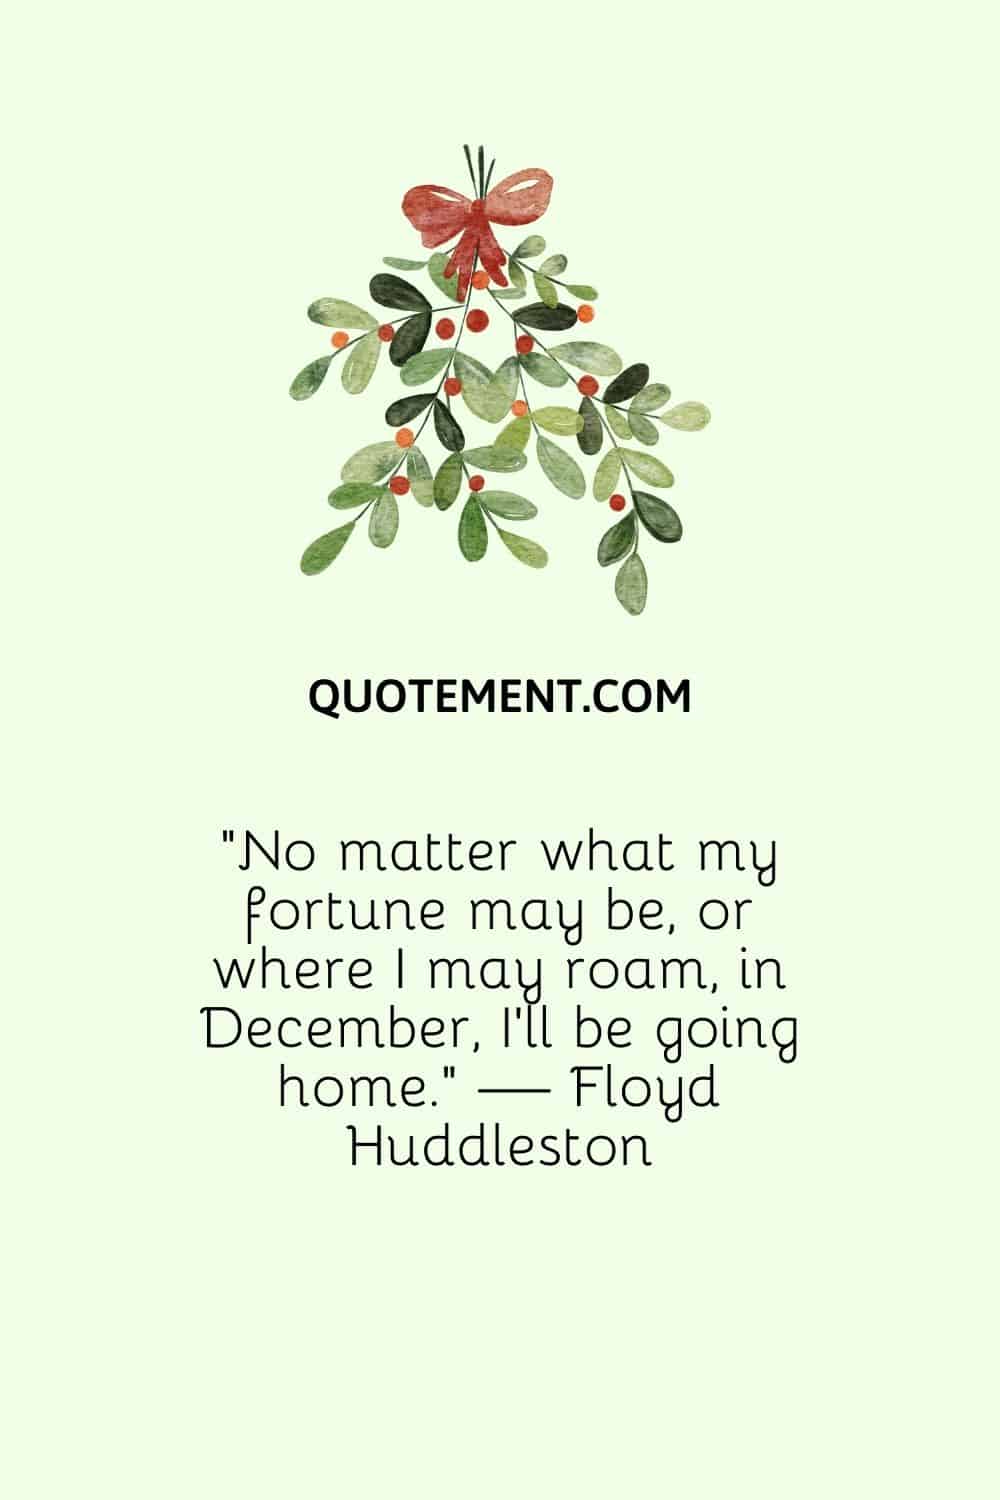 “No matter what my fortune may be, or where I may roam, in December, I’ll be going home.” — Floyd Huddleston